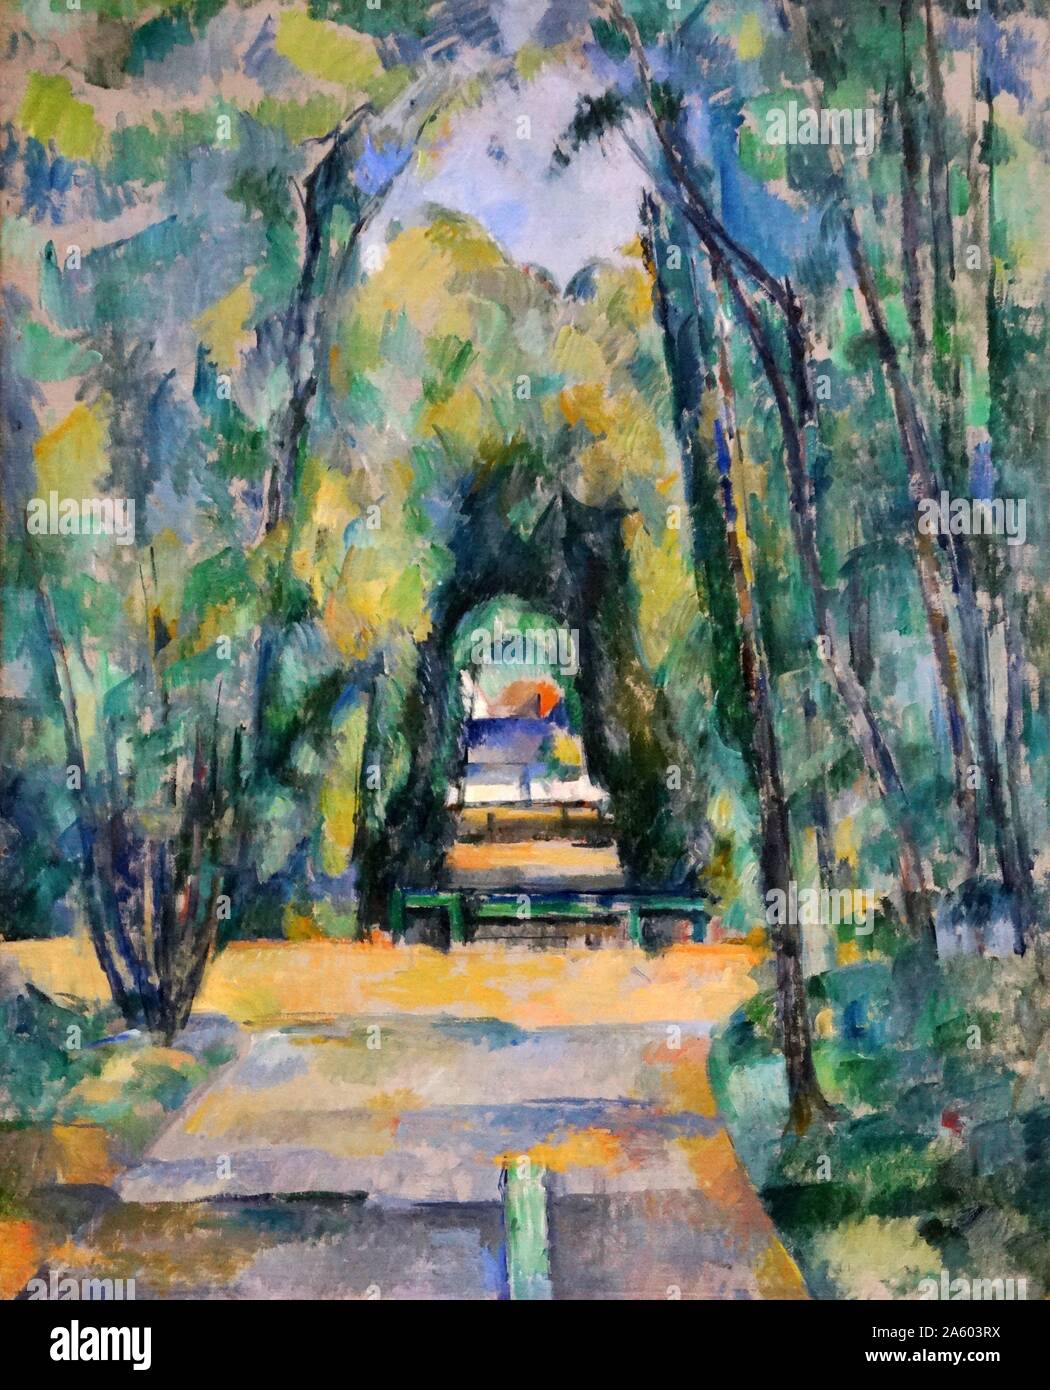 Painting titled 'Avenue at Chantilly' by Paul Cézanne (1839-1906) a French artist and Post-Impressionist painter. Dated 19th Century Stock Photo